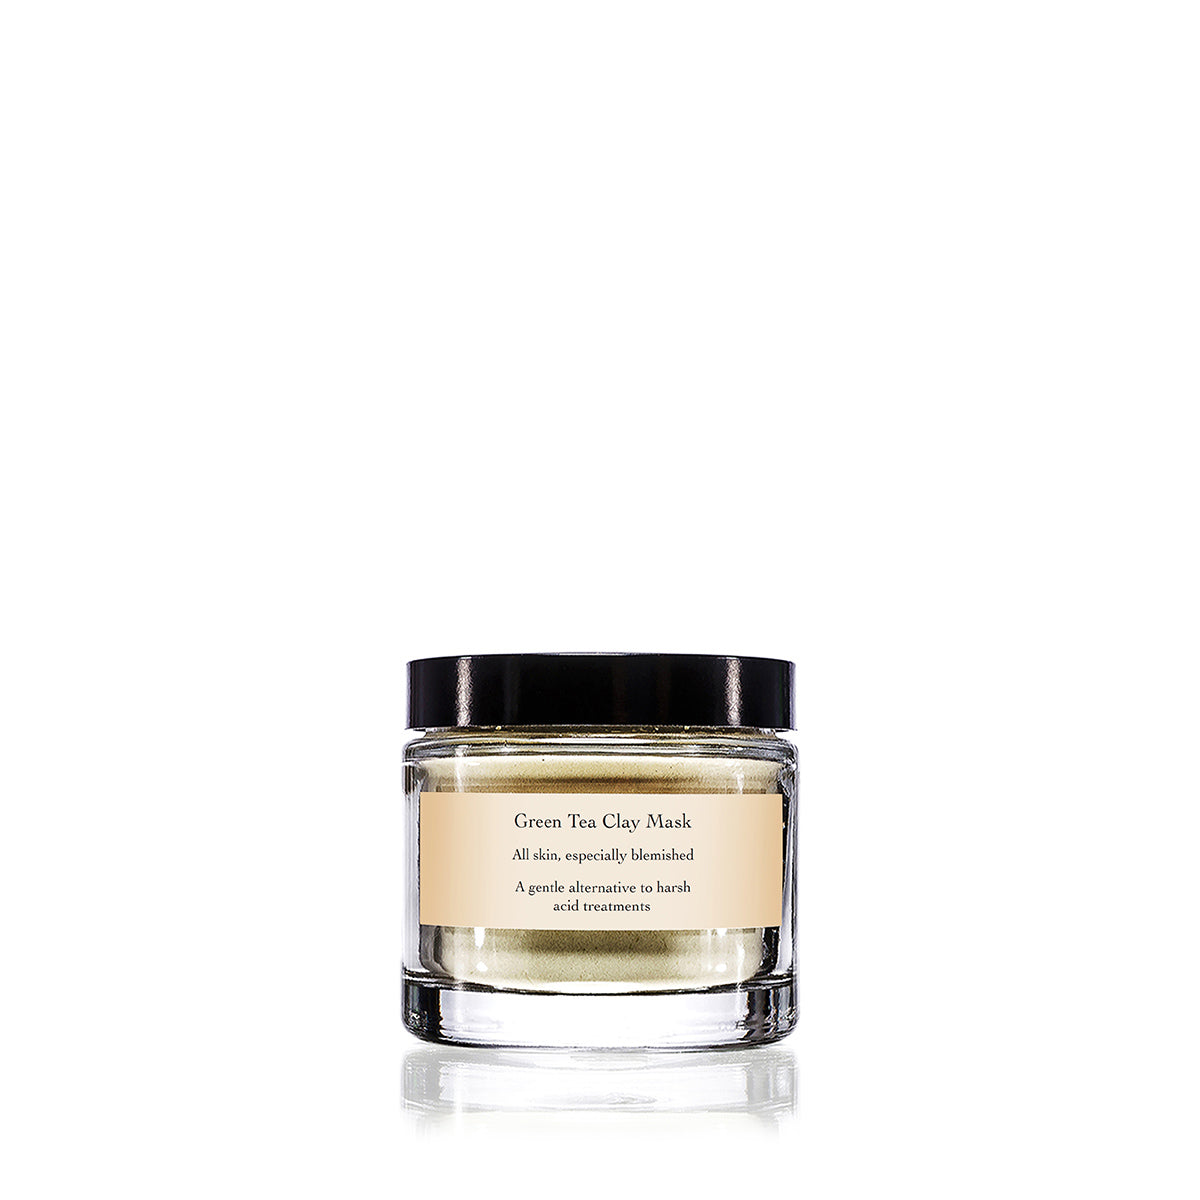 evanhealy green tea clay mask product in glass jar with black lid